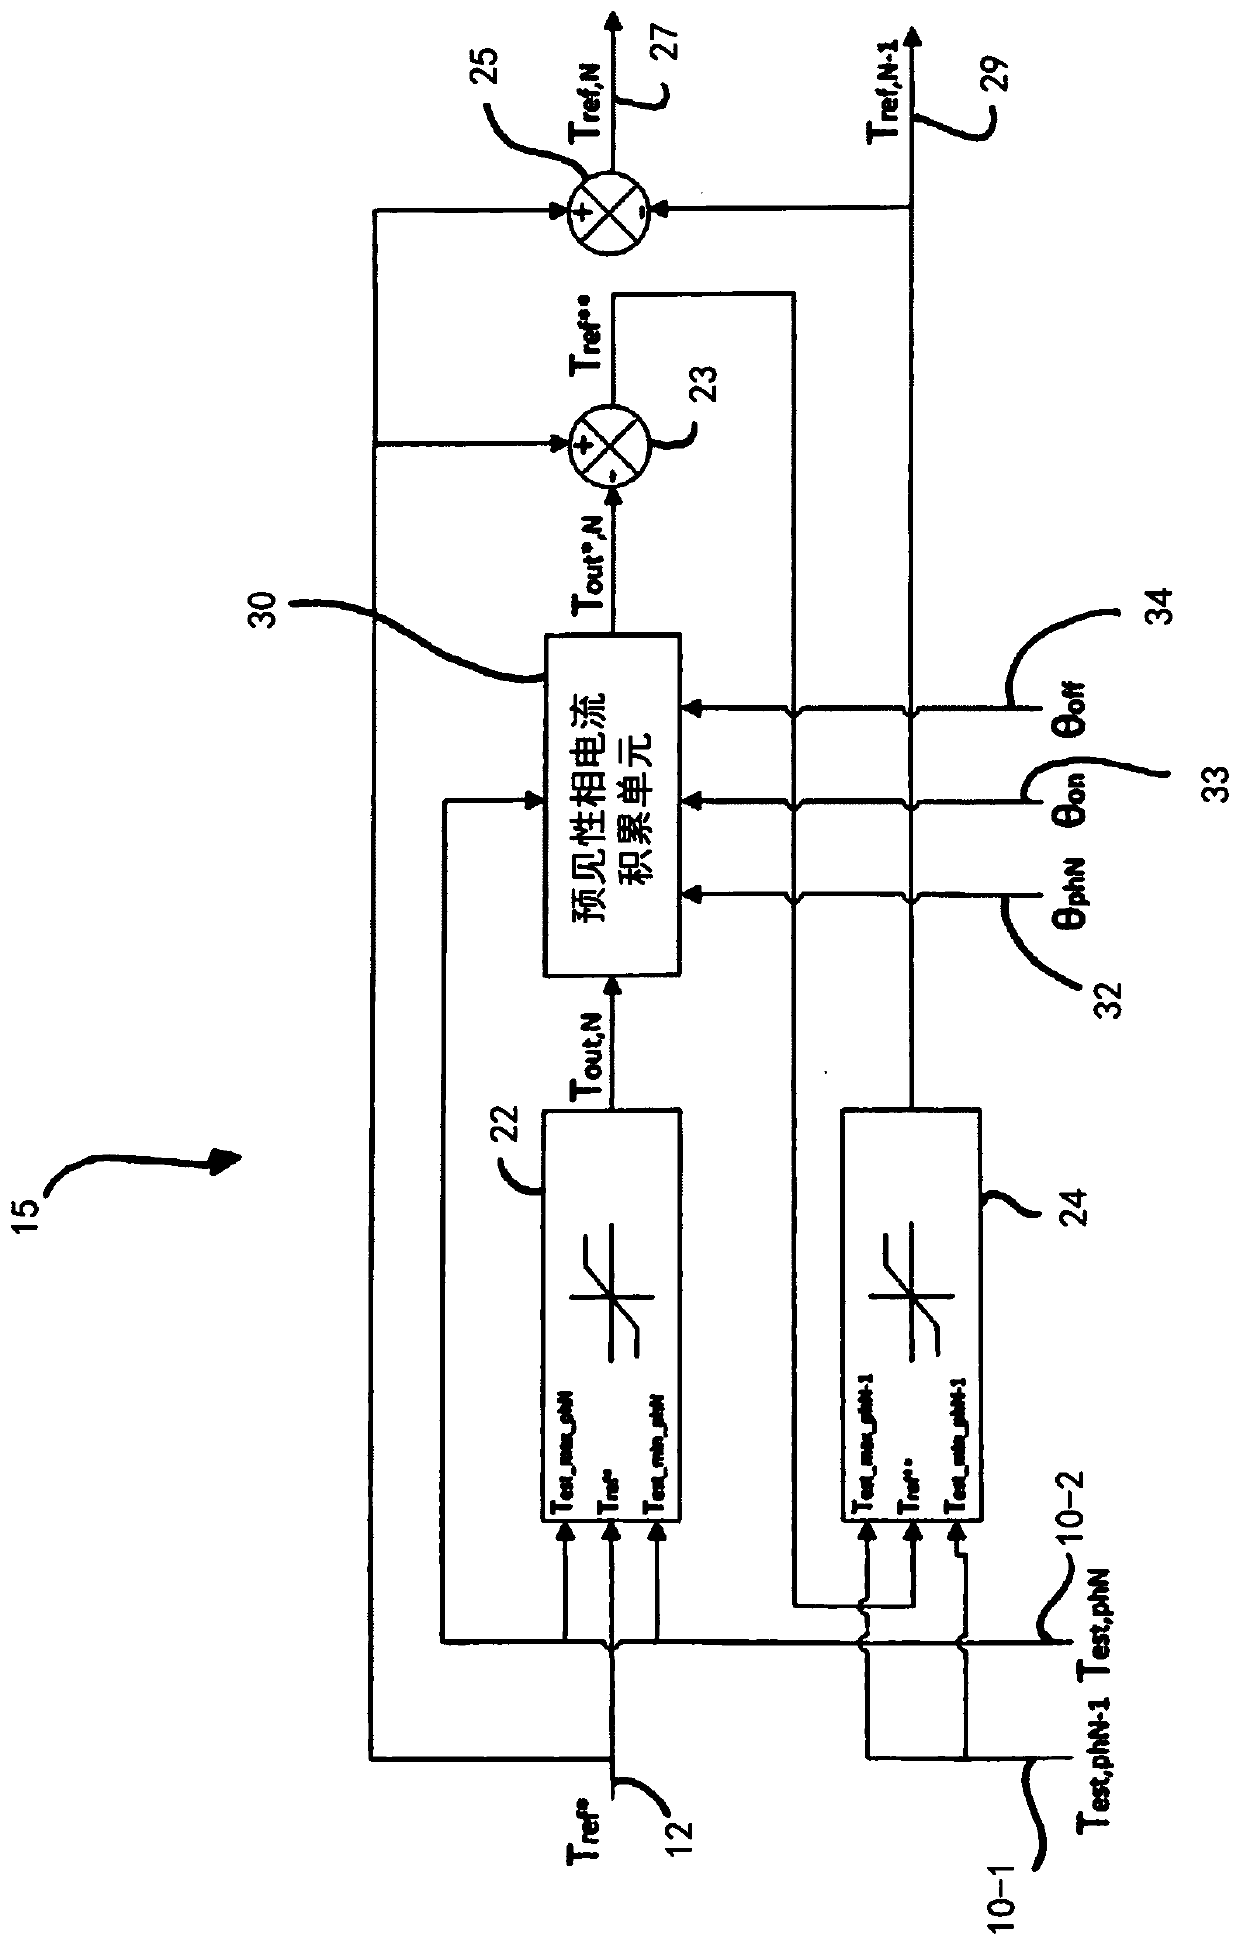 Controller system for and method of operating multiphase switched reluctance machine, and correction unit